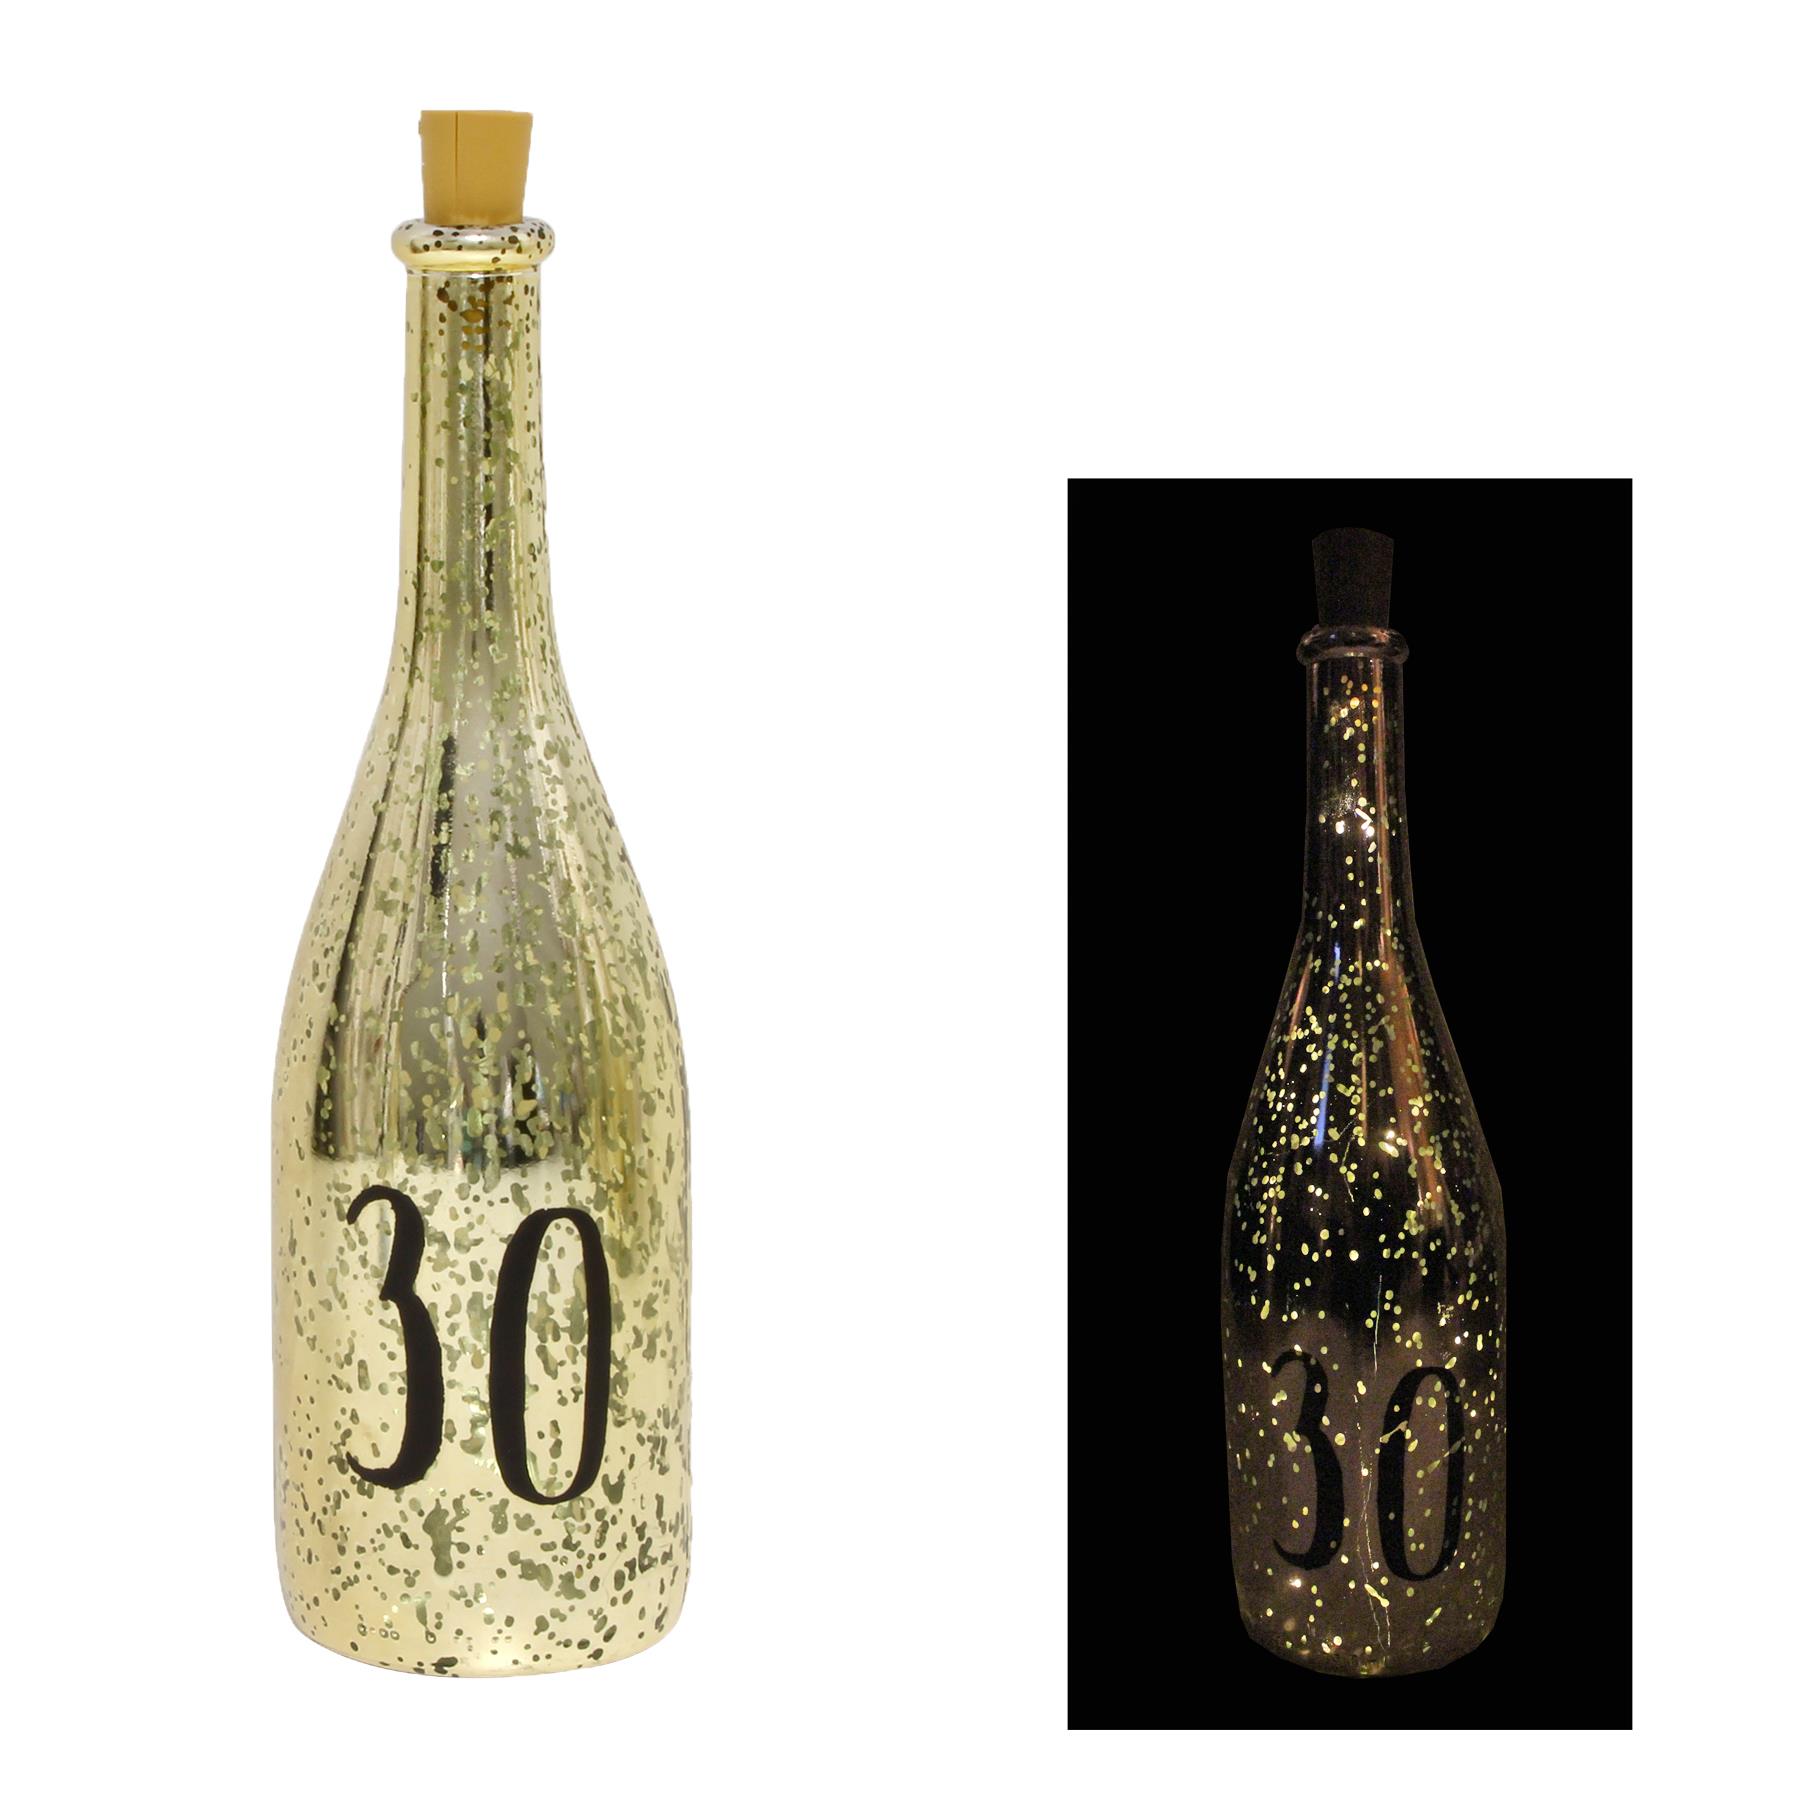 Gold Crackle Glaze Battery Light Up Bottle with Number - 30th Birthday Gift